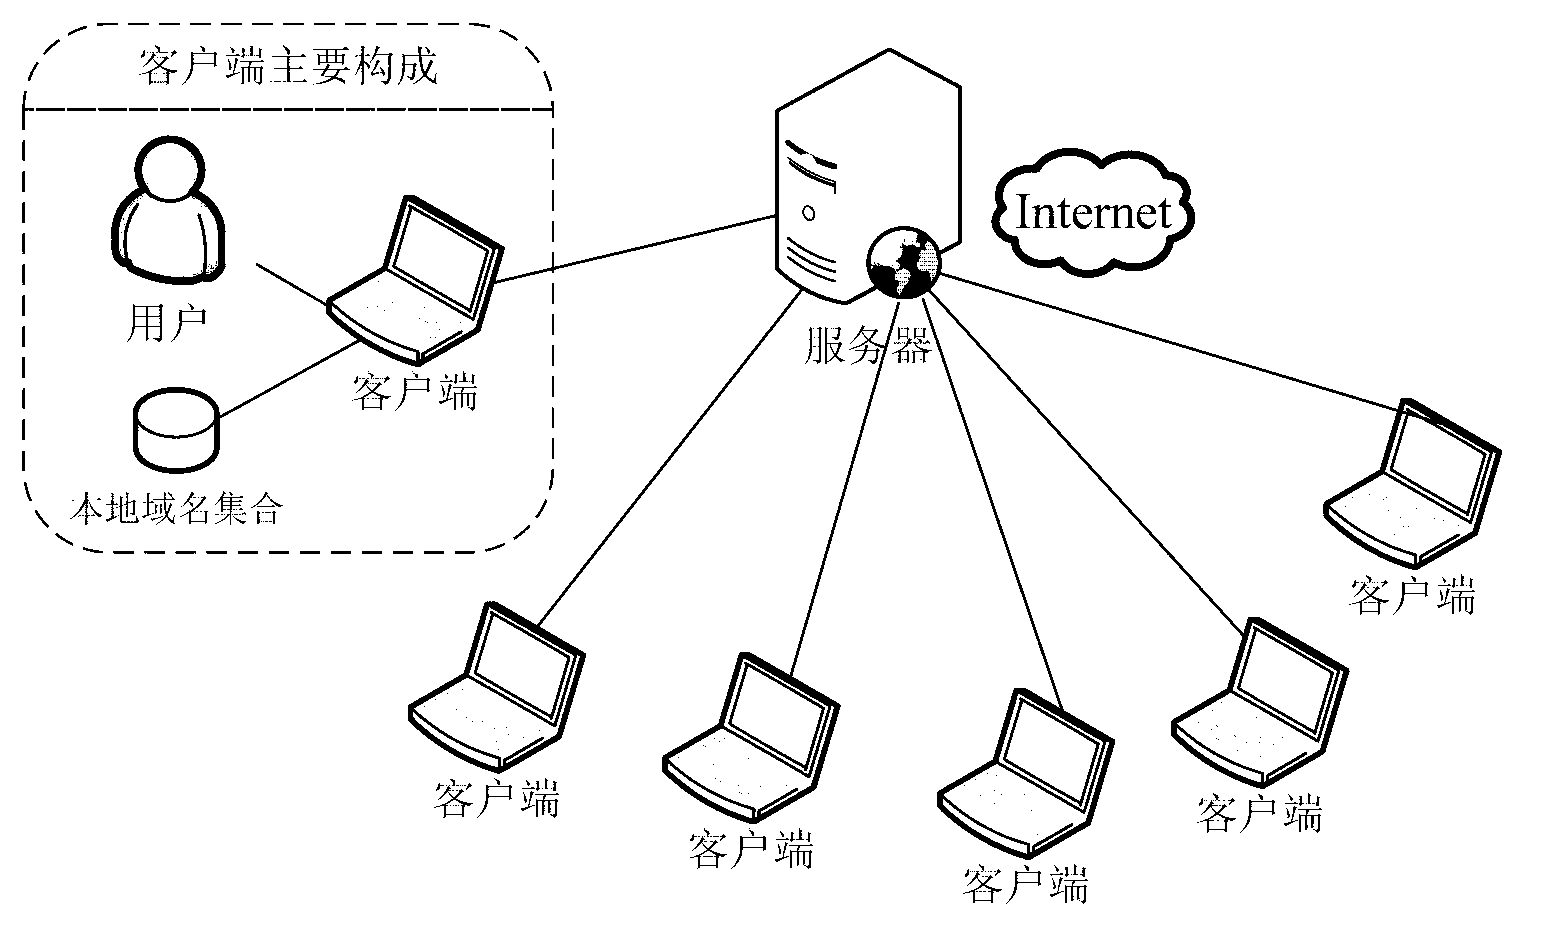 Domain name access control method and system based on user evaluation